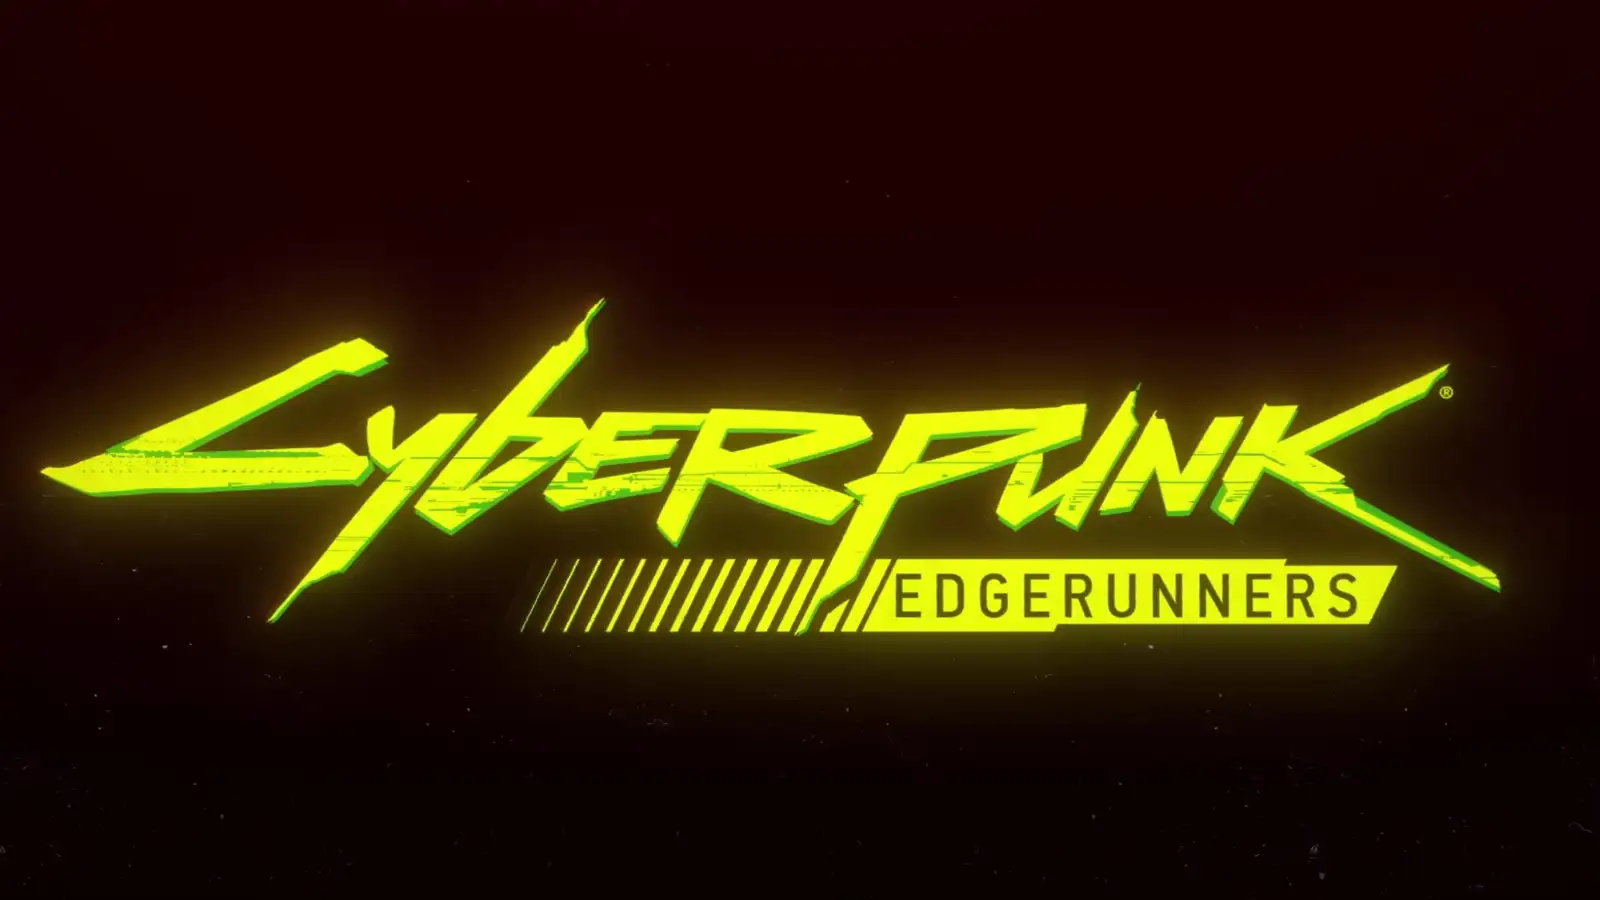 Cyberpunk Edgerunners Teaser Trailer First Look At Netflix Anime Series  Based On Video Game Premiere Date